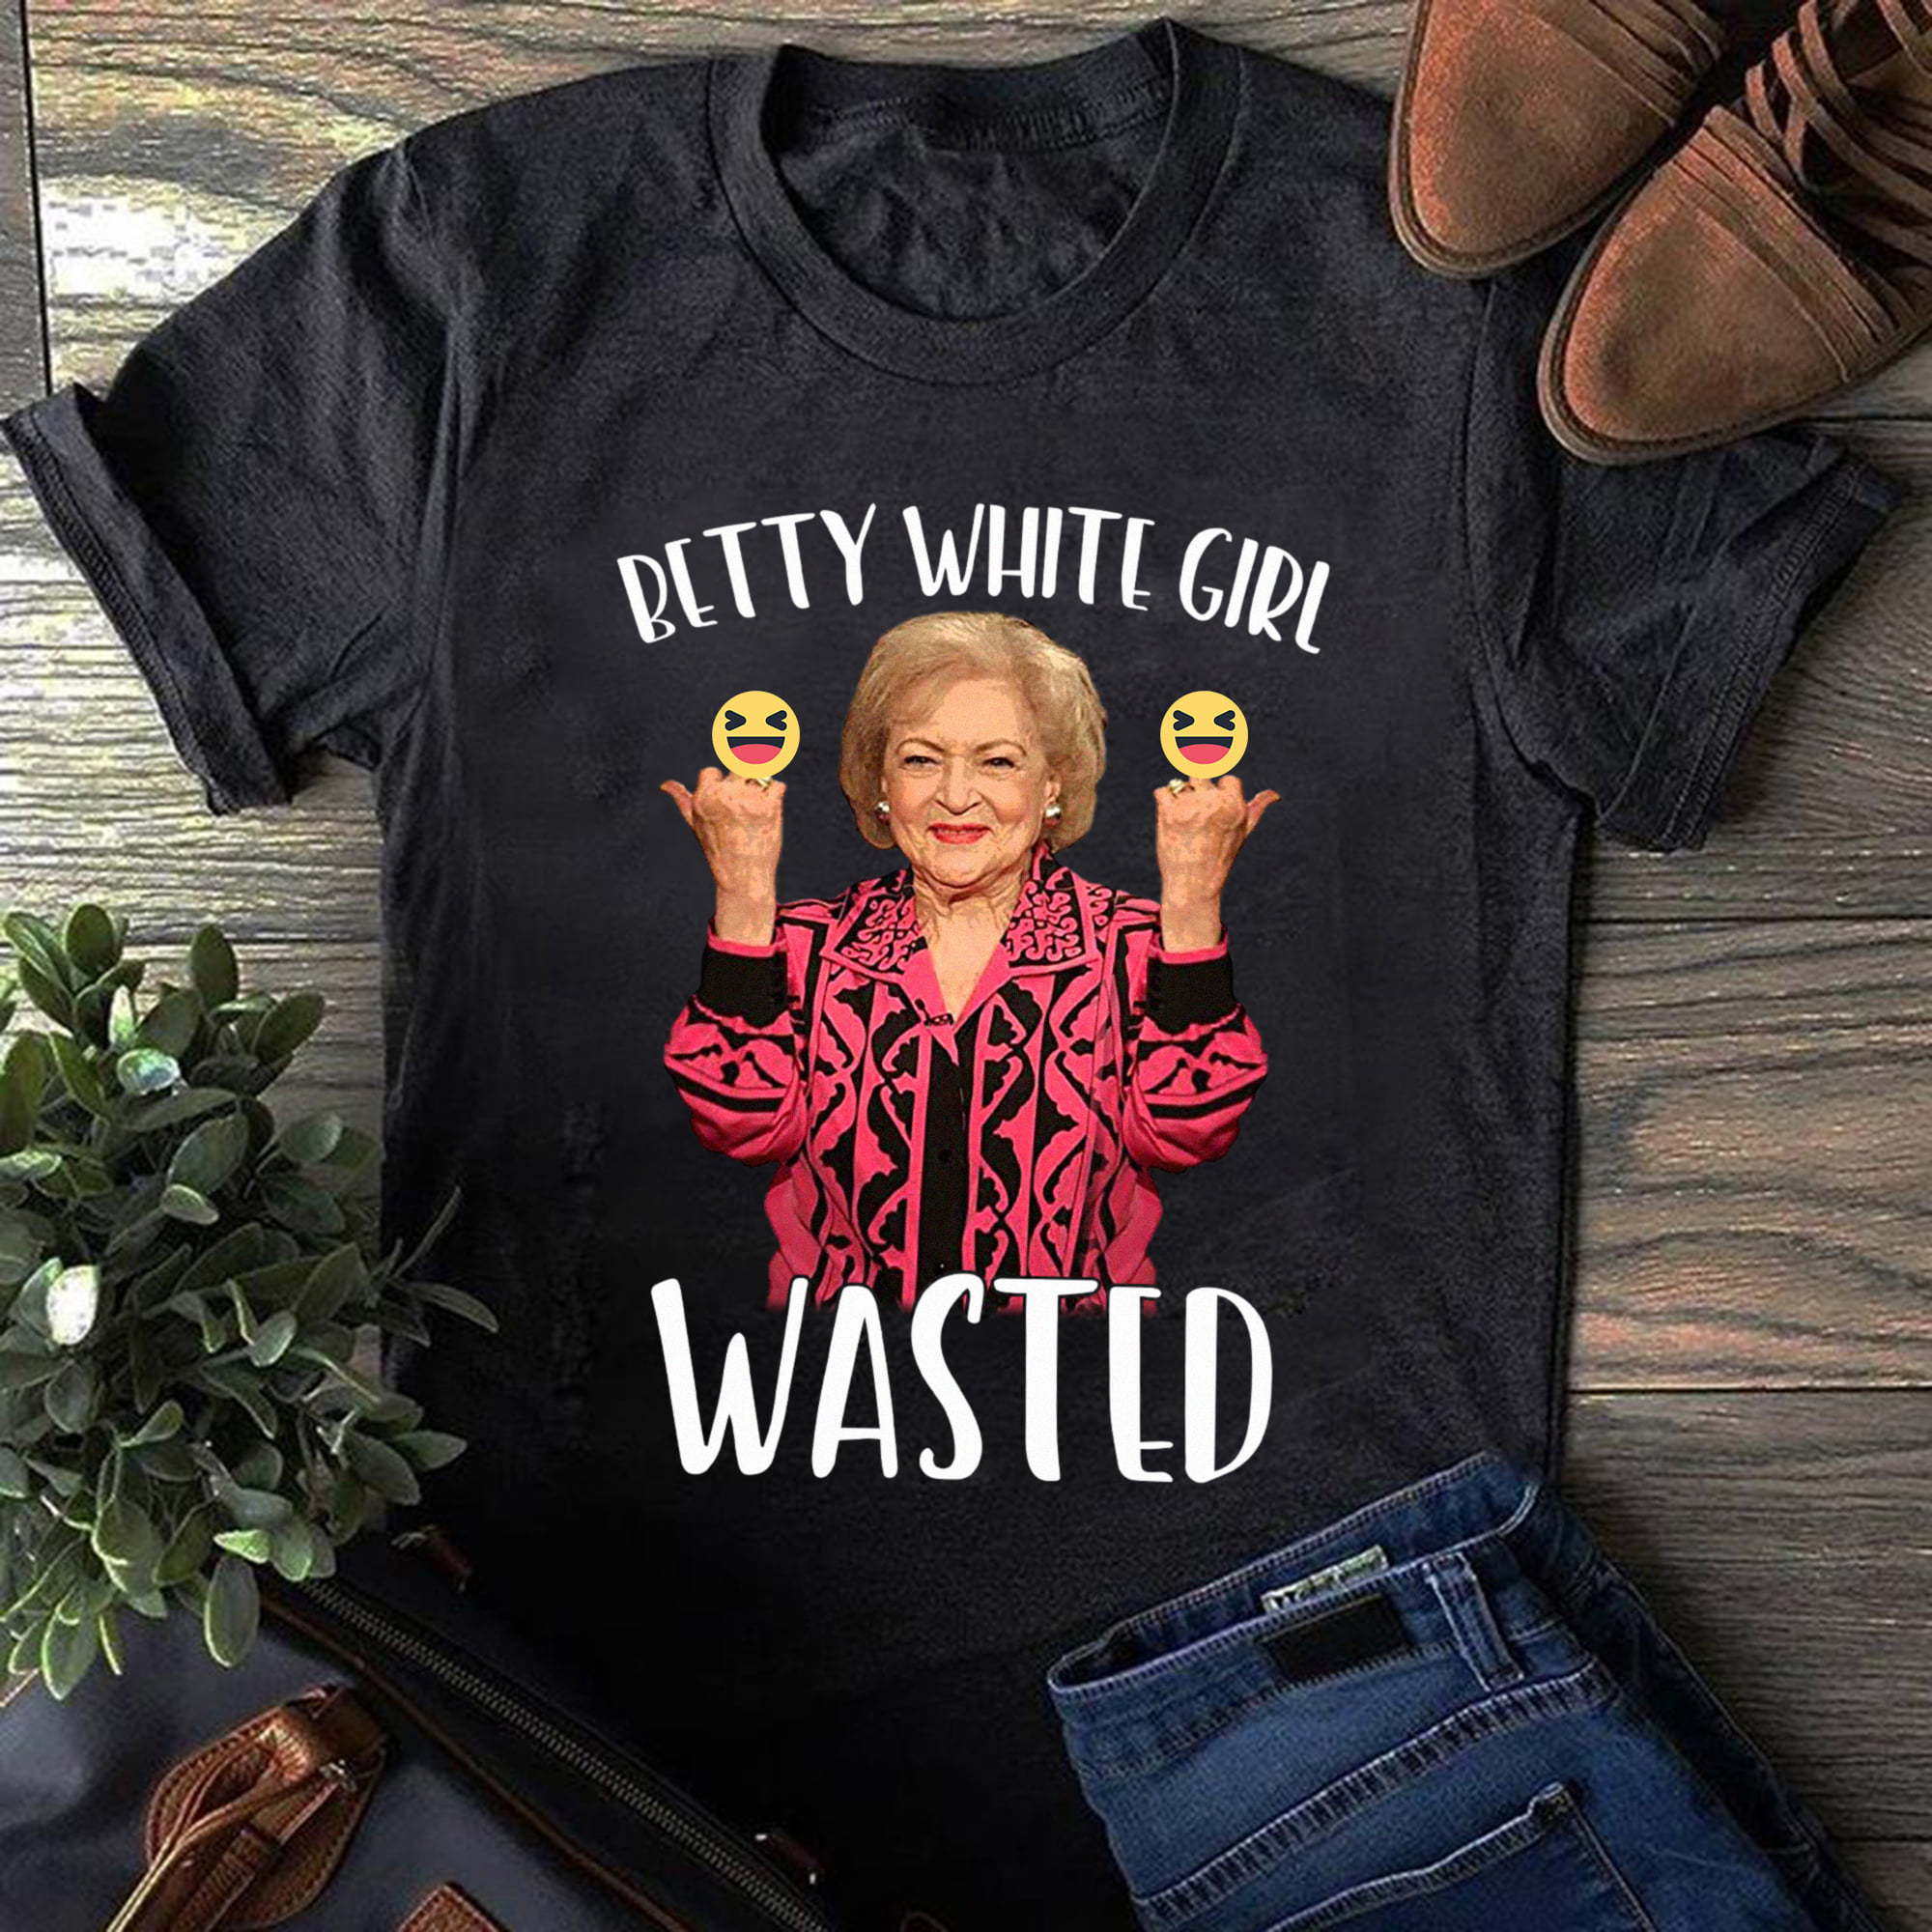 Betty White girl wasted - Betty White the actress, Funny Betty White T-shirt